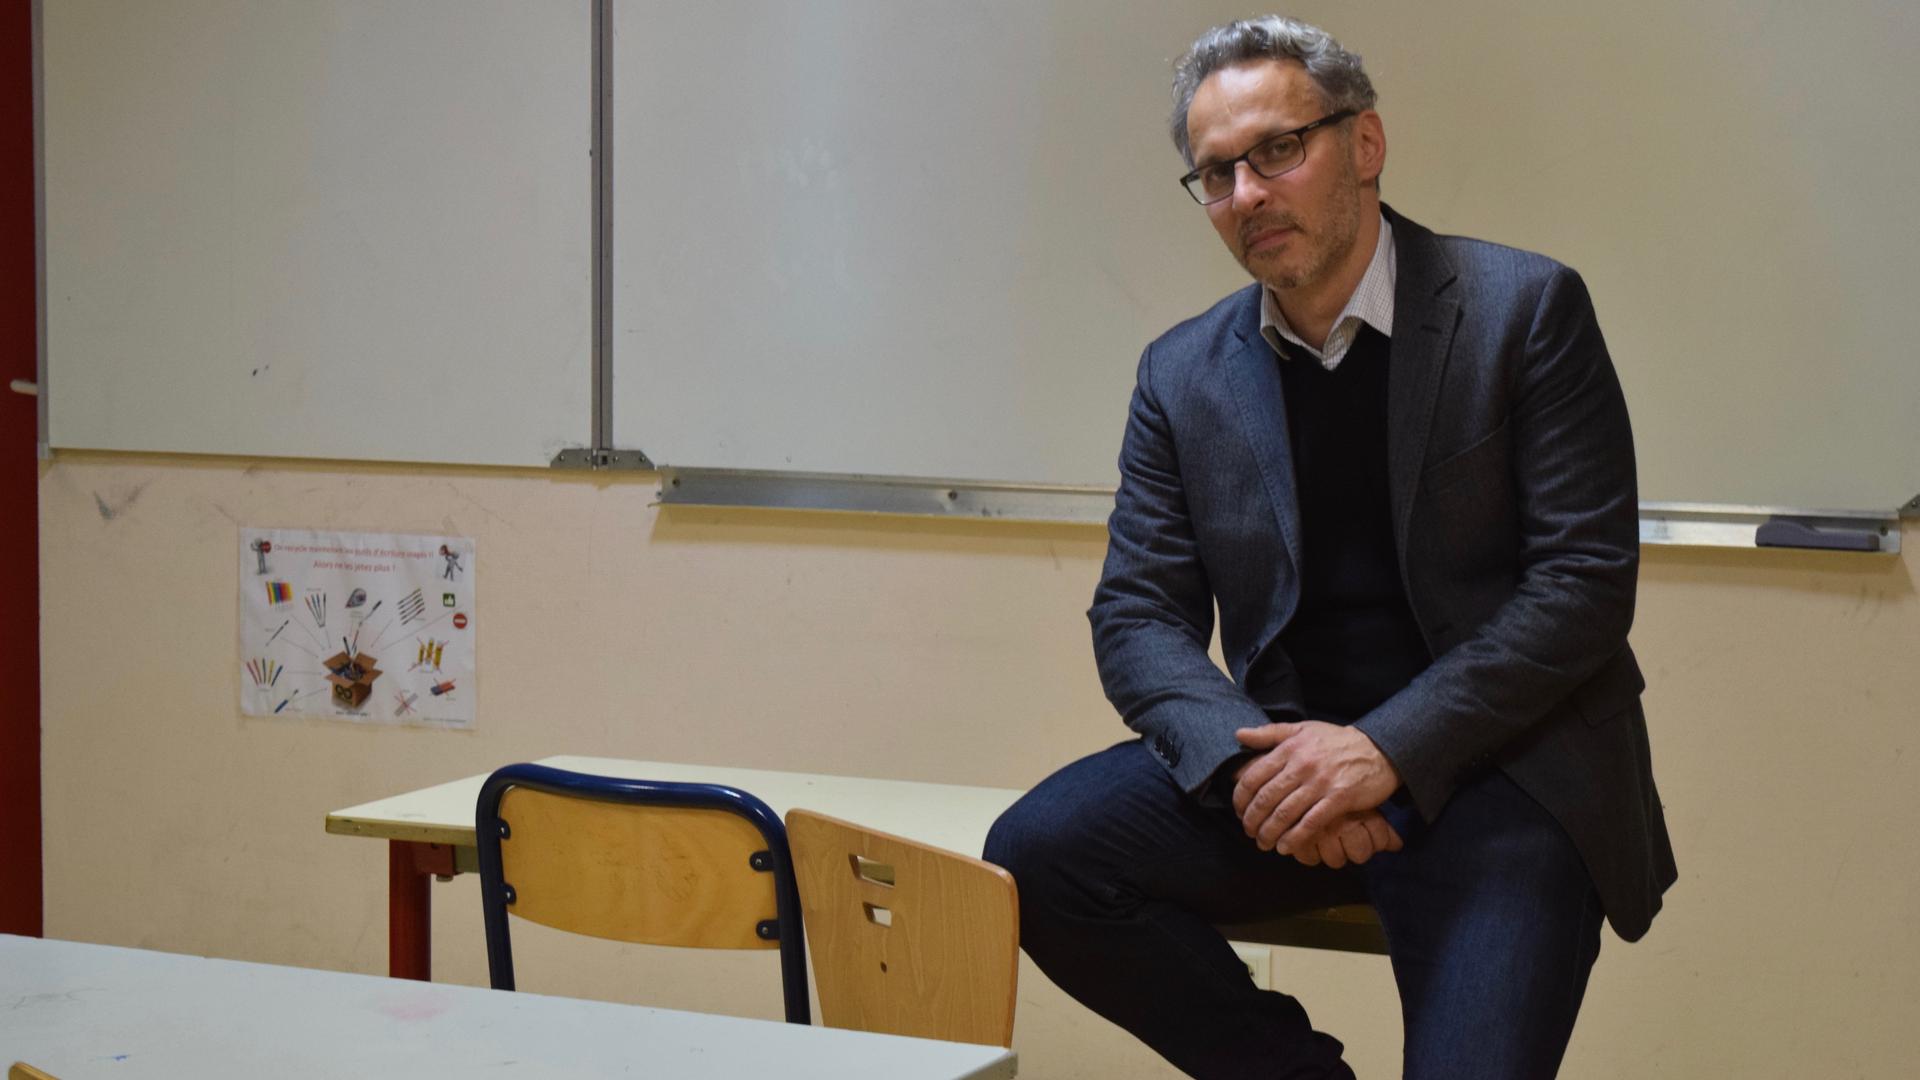 Iannis Roder, a historian and public school middle school teacher in the Paris suburb of Seine-Saint-Denis, calls the French Education Ministry's approach to Holocaust education 